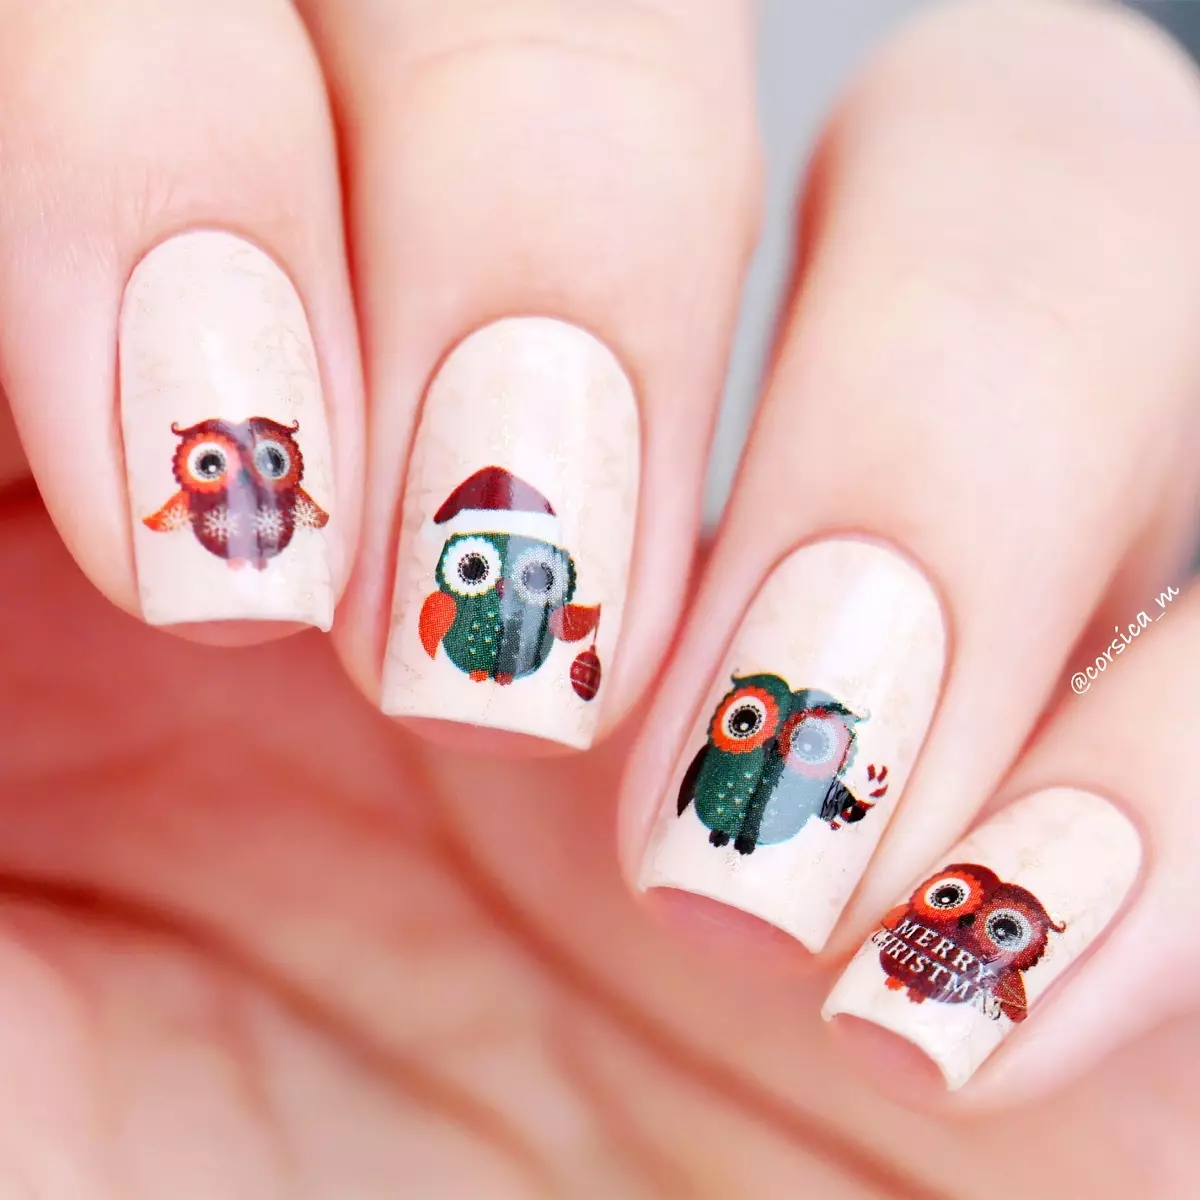 Manicure with owls (63 photos): Best design ideas on nails with drawings 6412_49